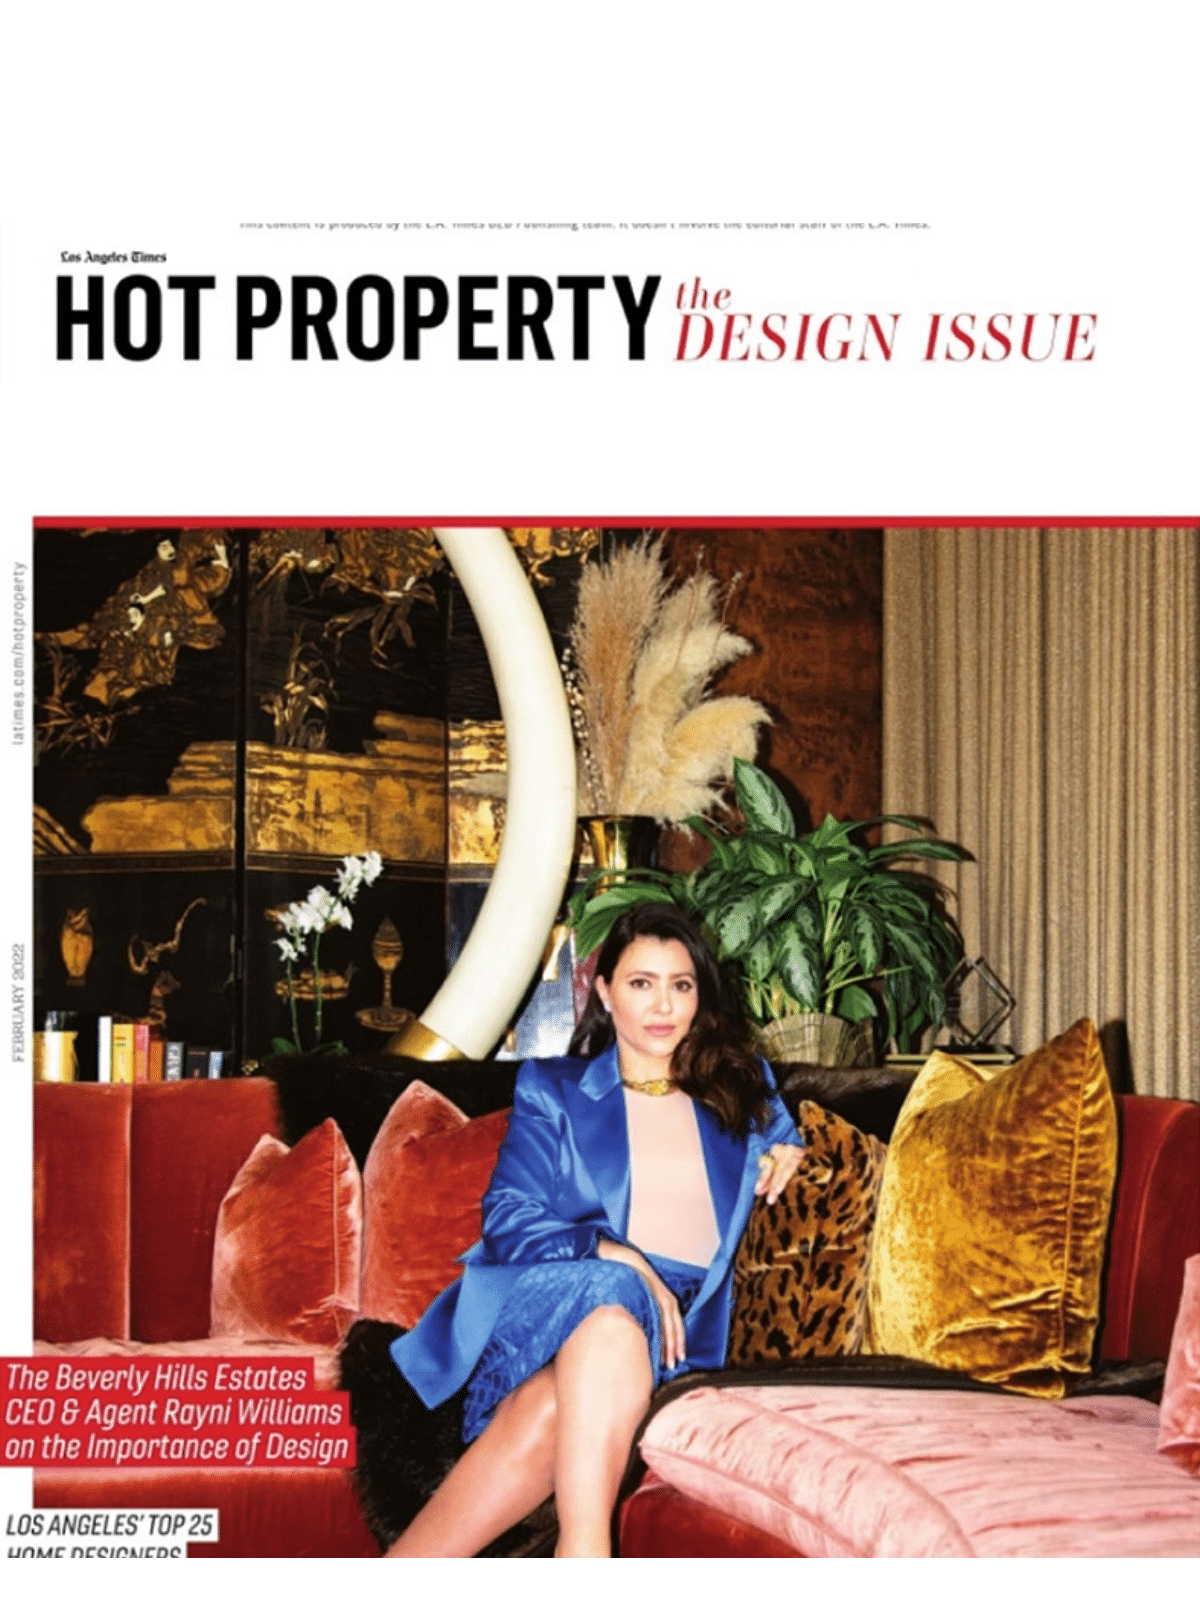 Kate Lester Interiors featured in LA Times Hot Property